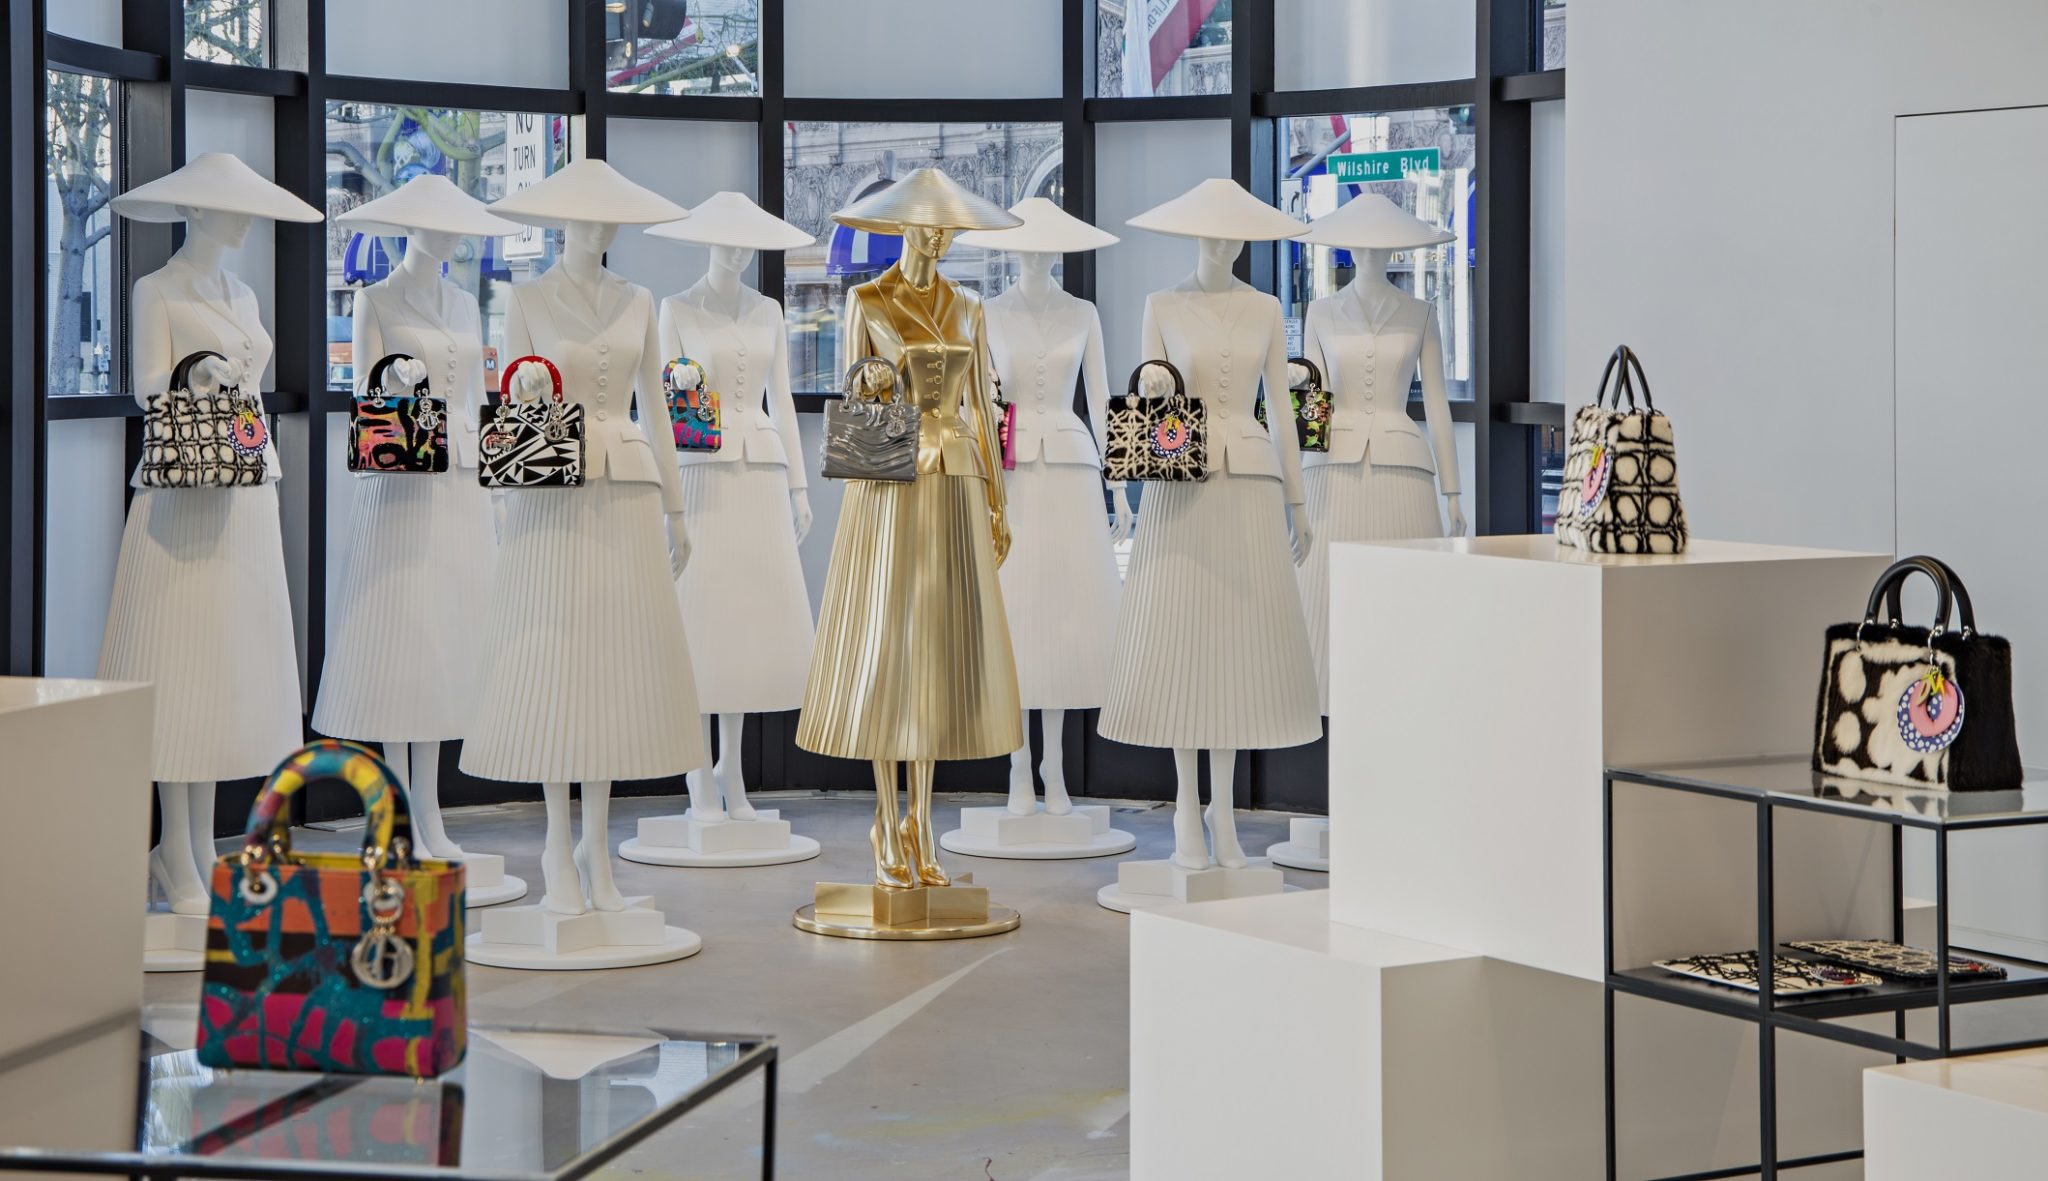 DIOR Store  Los angeles aesthetic, Travel aesthetic, Los angeles